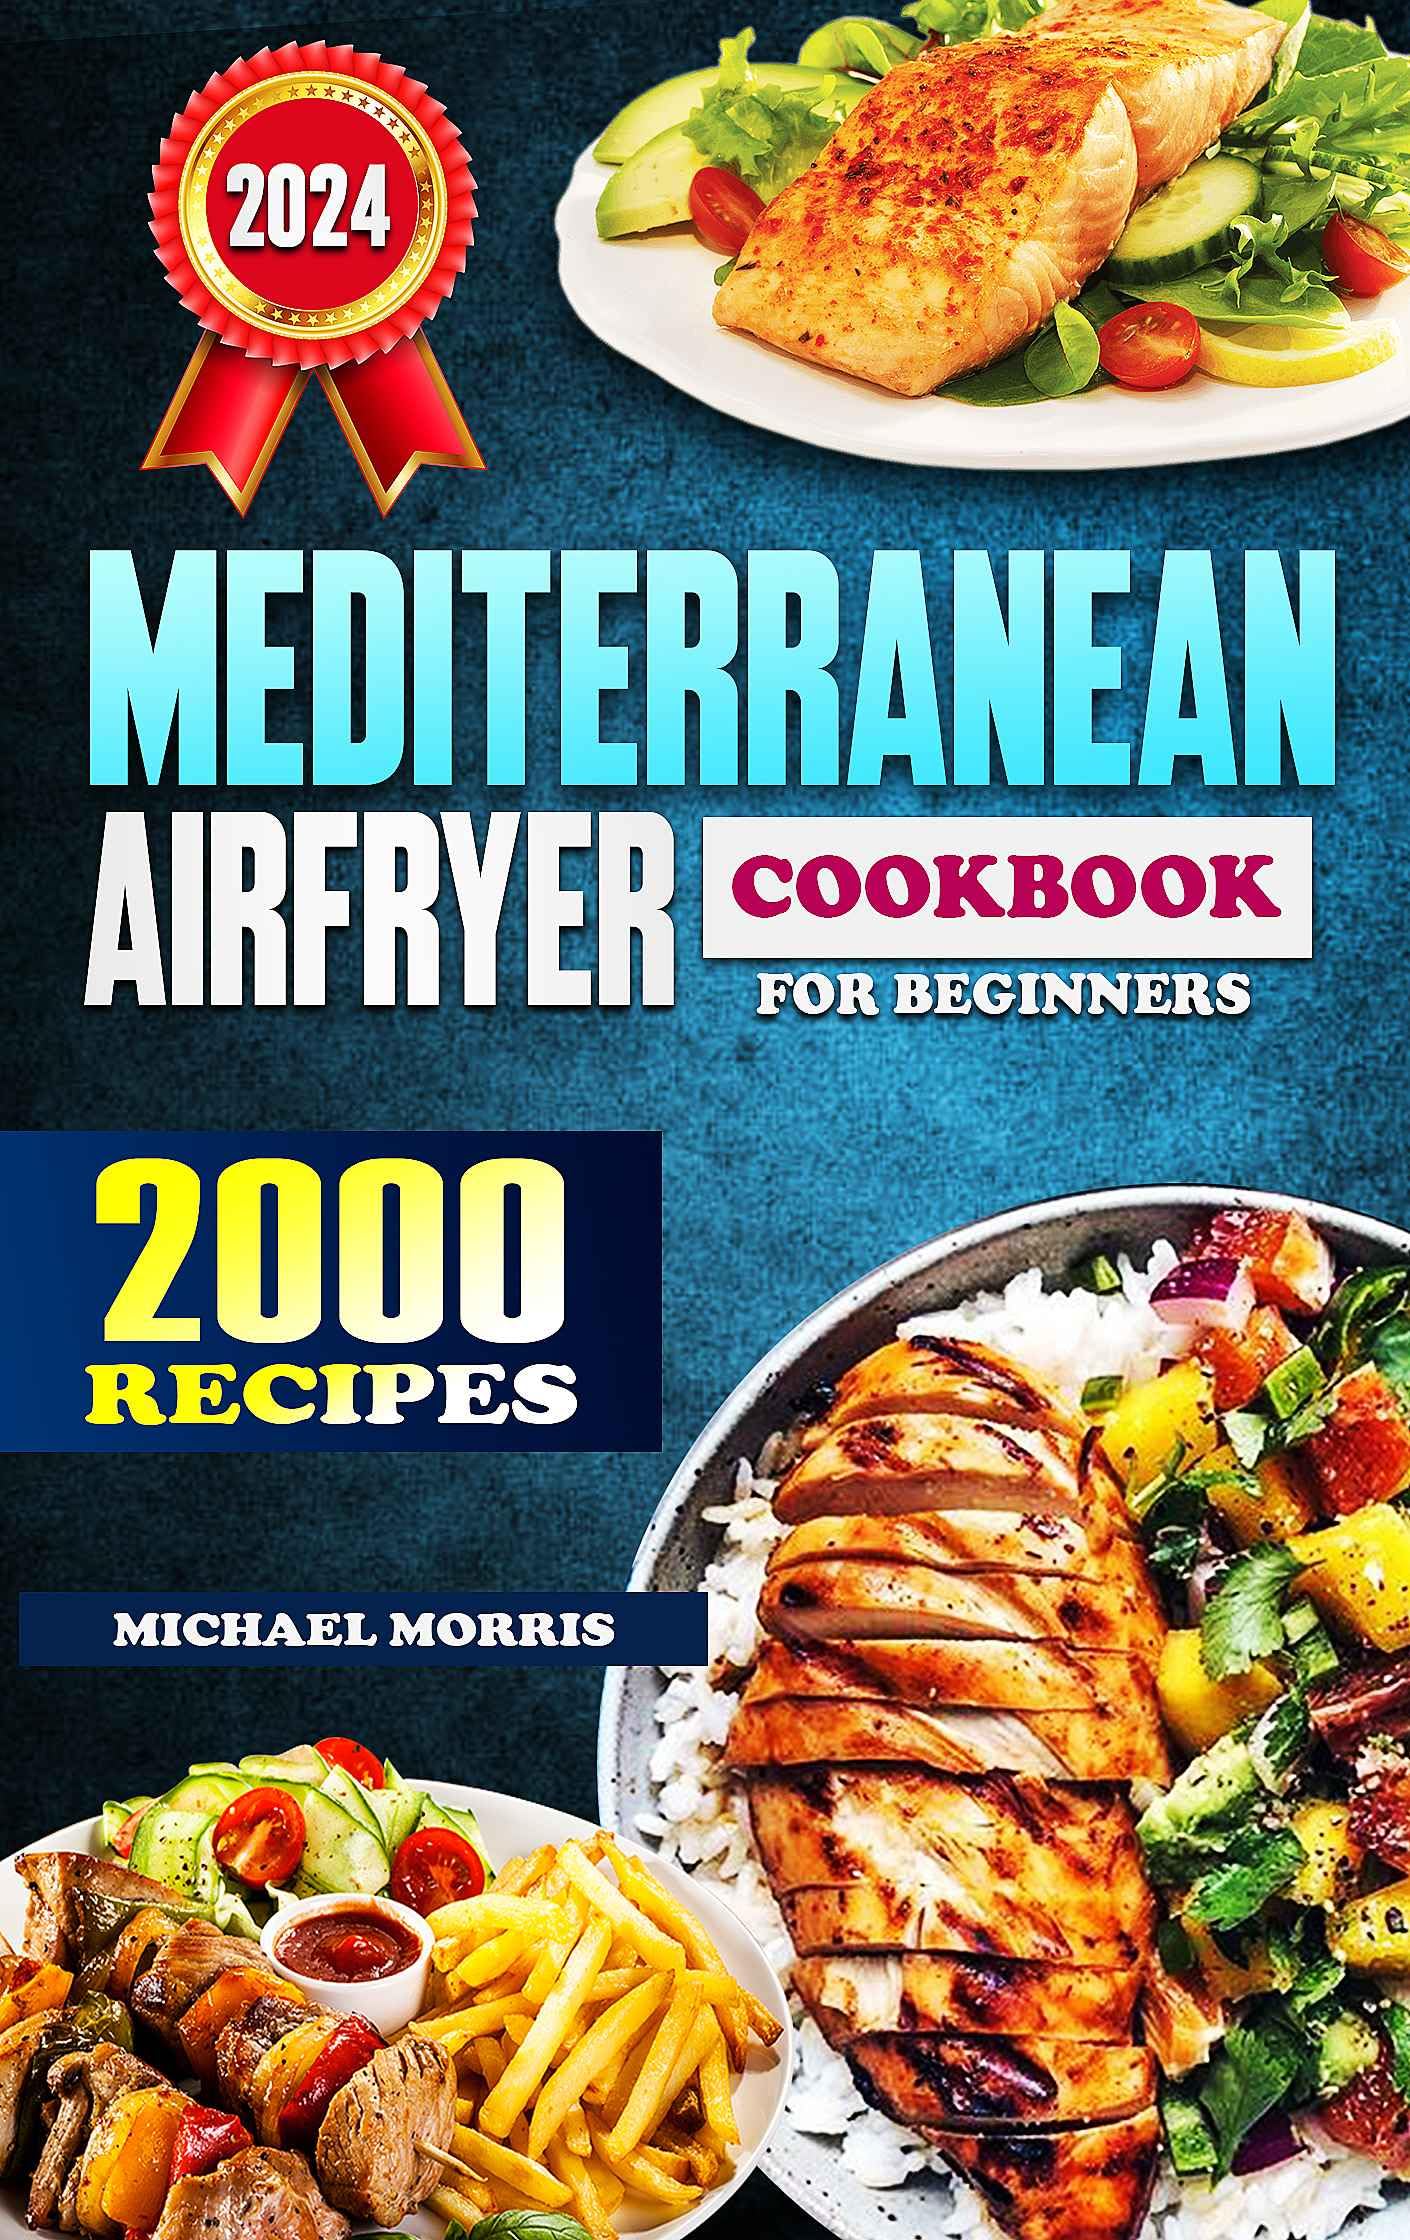 Free Amazon Cookbooks: Instant Pot, Air Fryer, Slow Cooker, Disney, Young Chefs, Caribbean, Copycat, Vintage Baking, Retro, Mexico, Kebob, Camping, Italian, Greek,  MORE !!